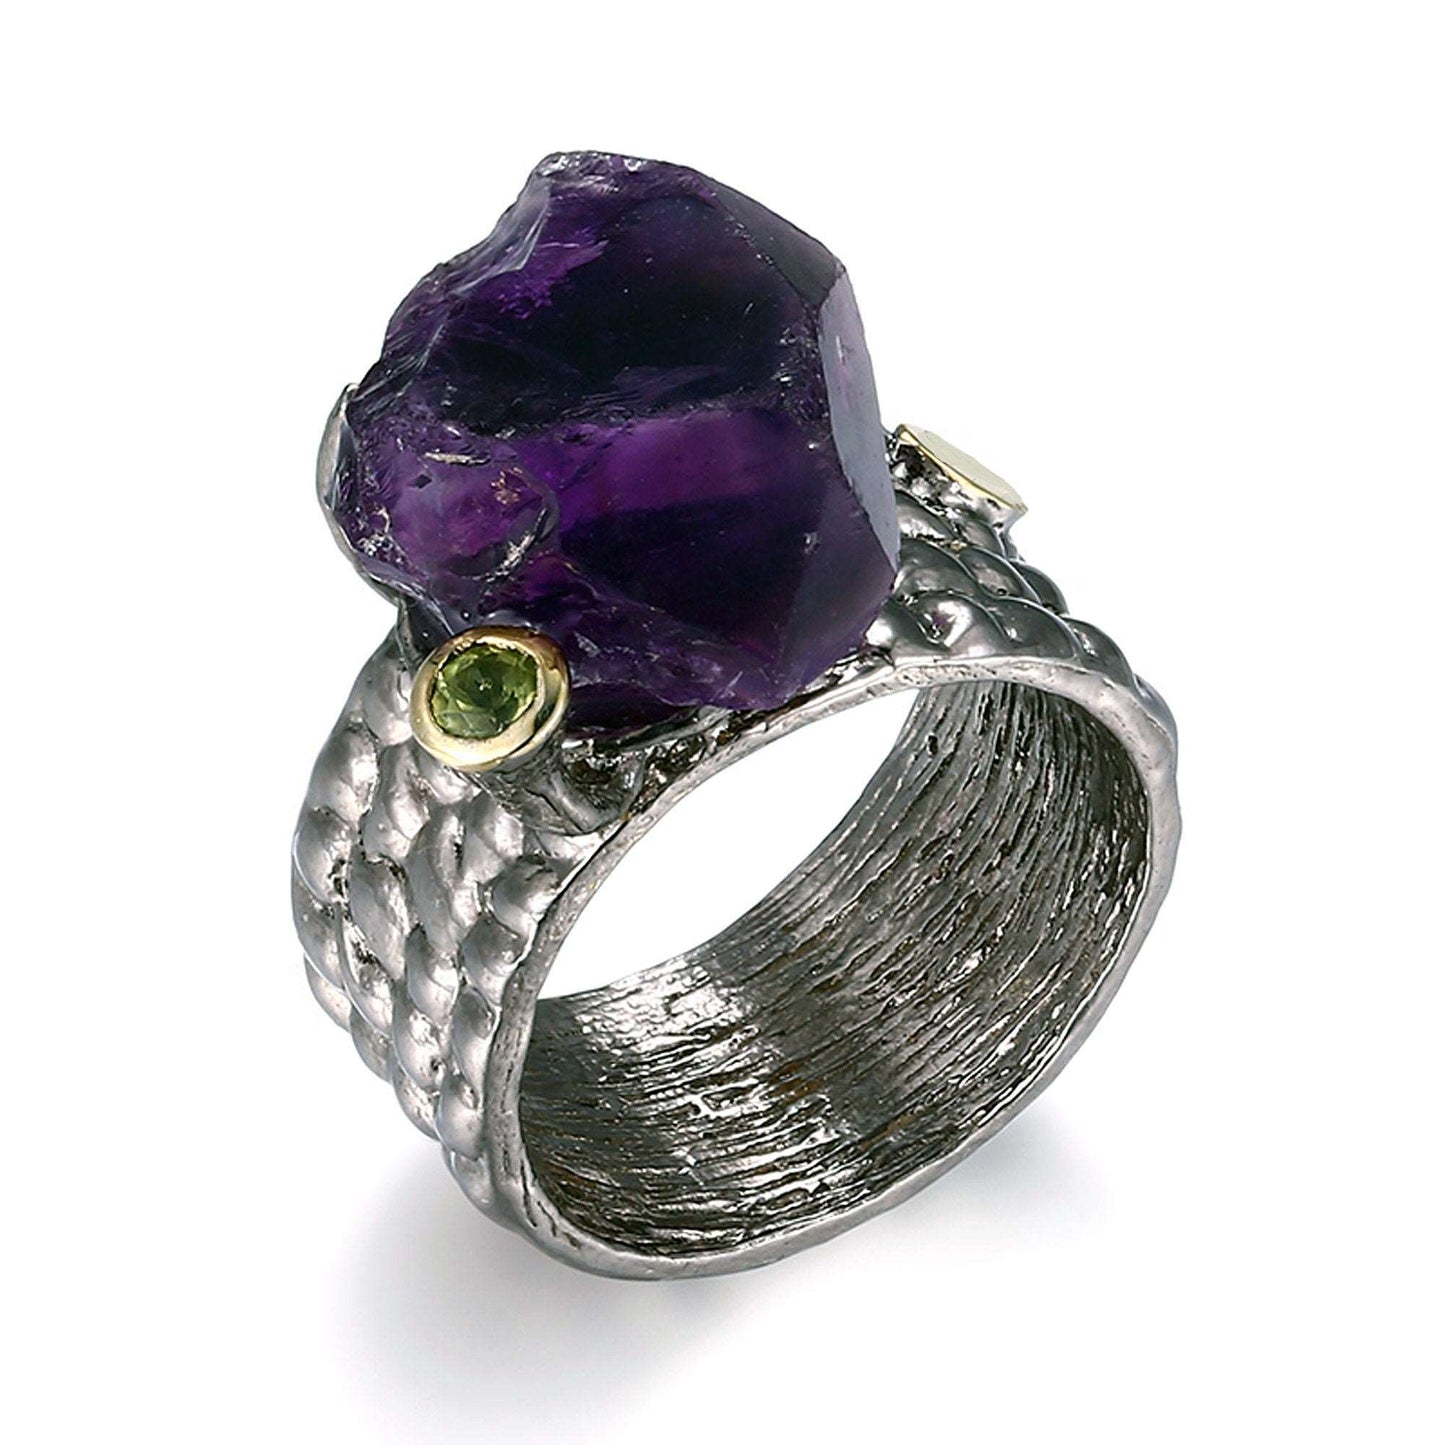 Large uncut amethyst stone in sterling silver ring - Providence silver gold jewelry usa